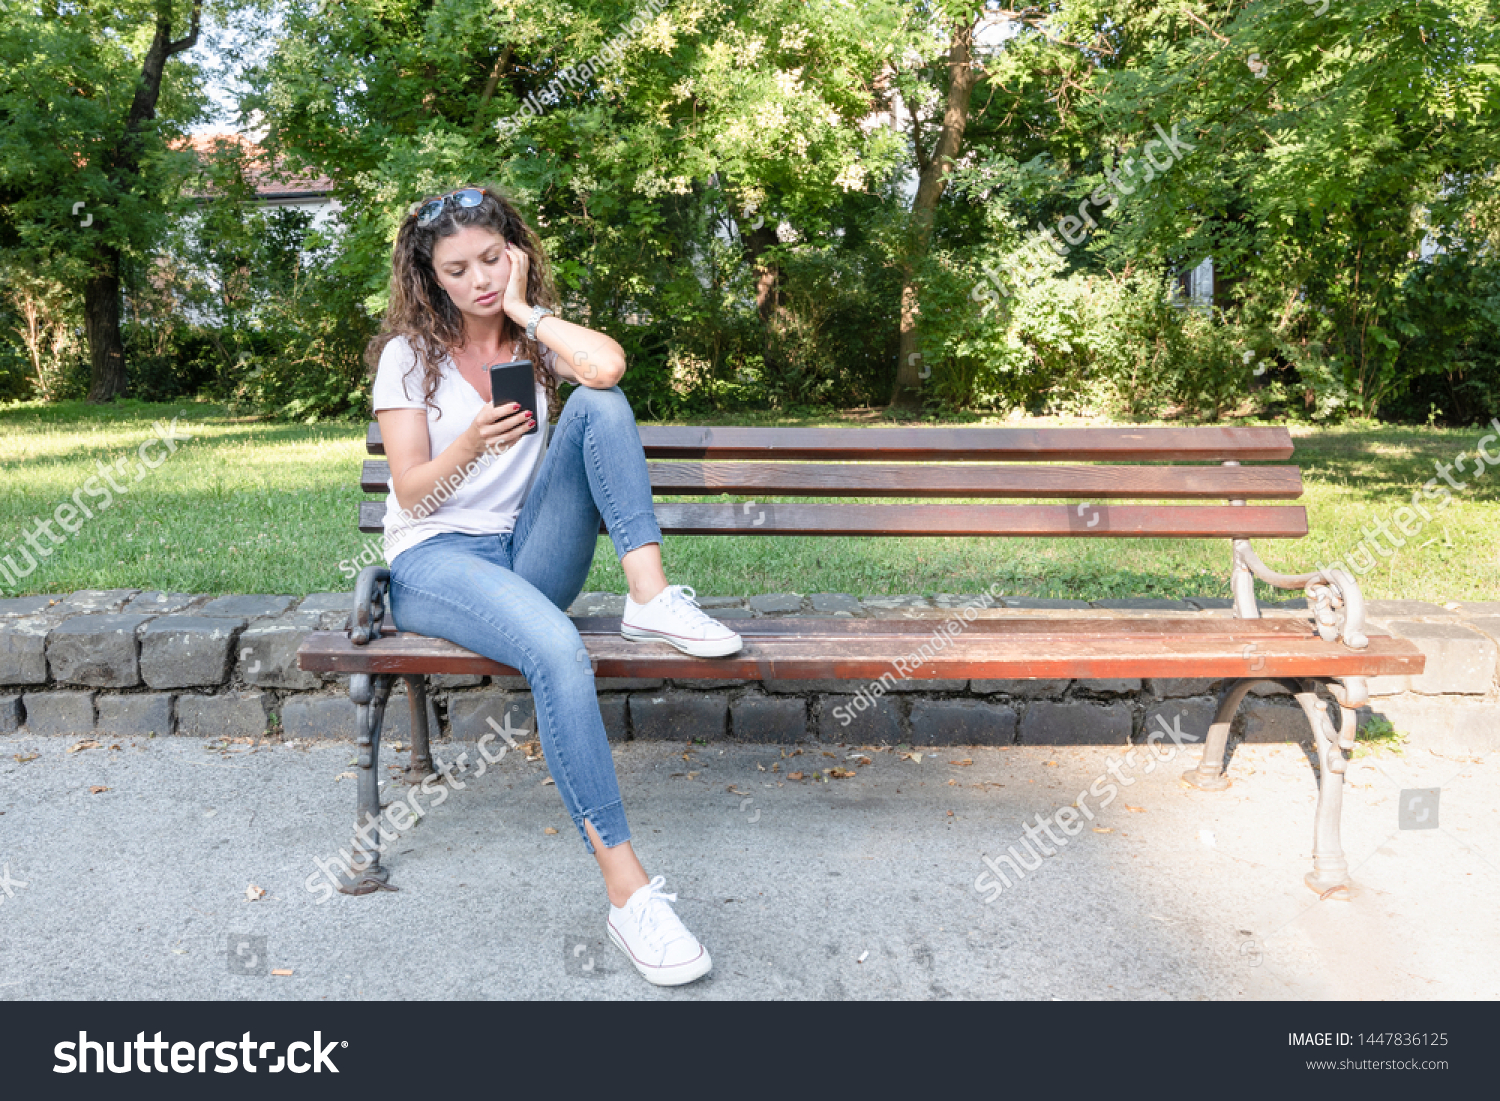 On the bench